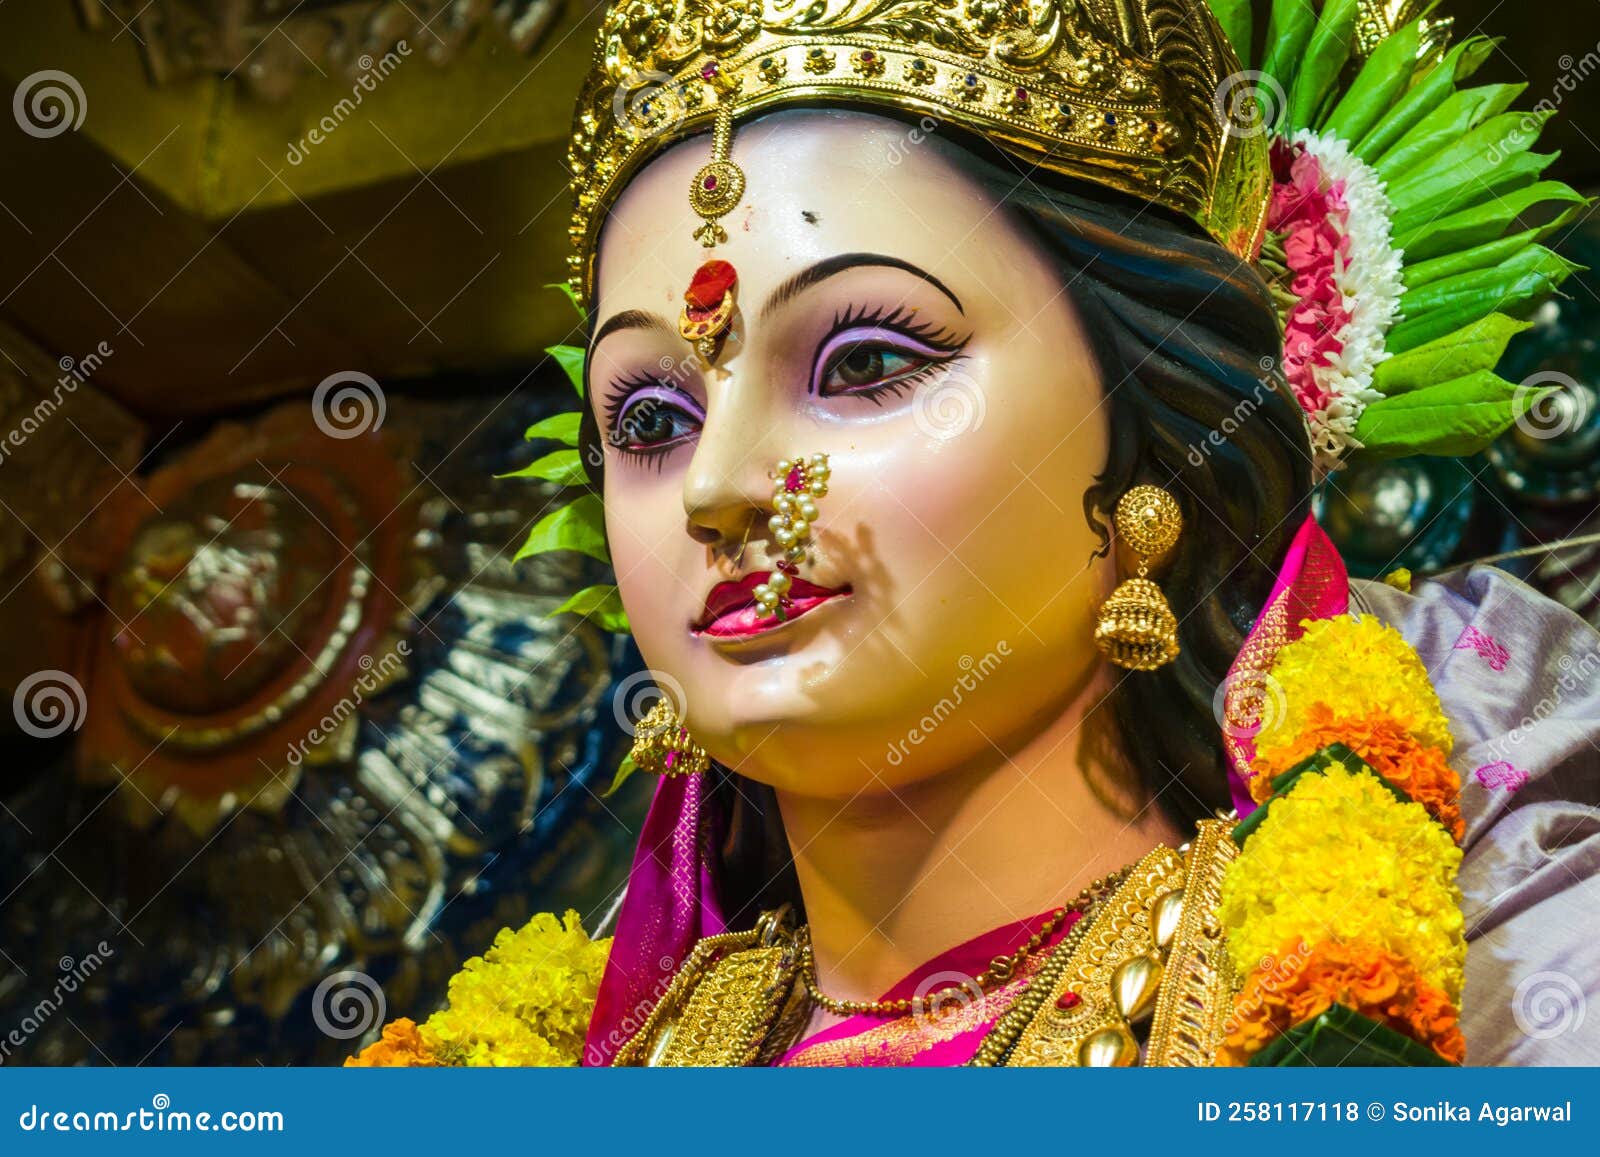 Collection of Amazing Maa Durga Images: Free Downloads in Full 4K ...